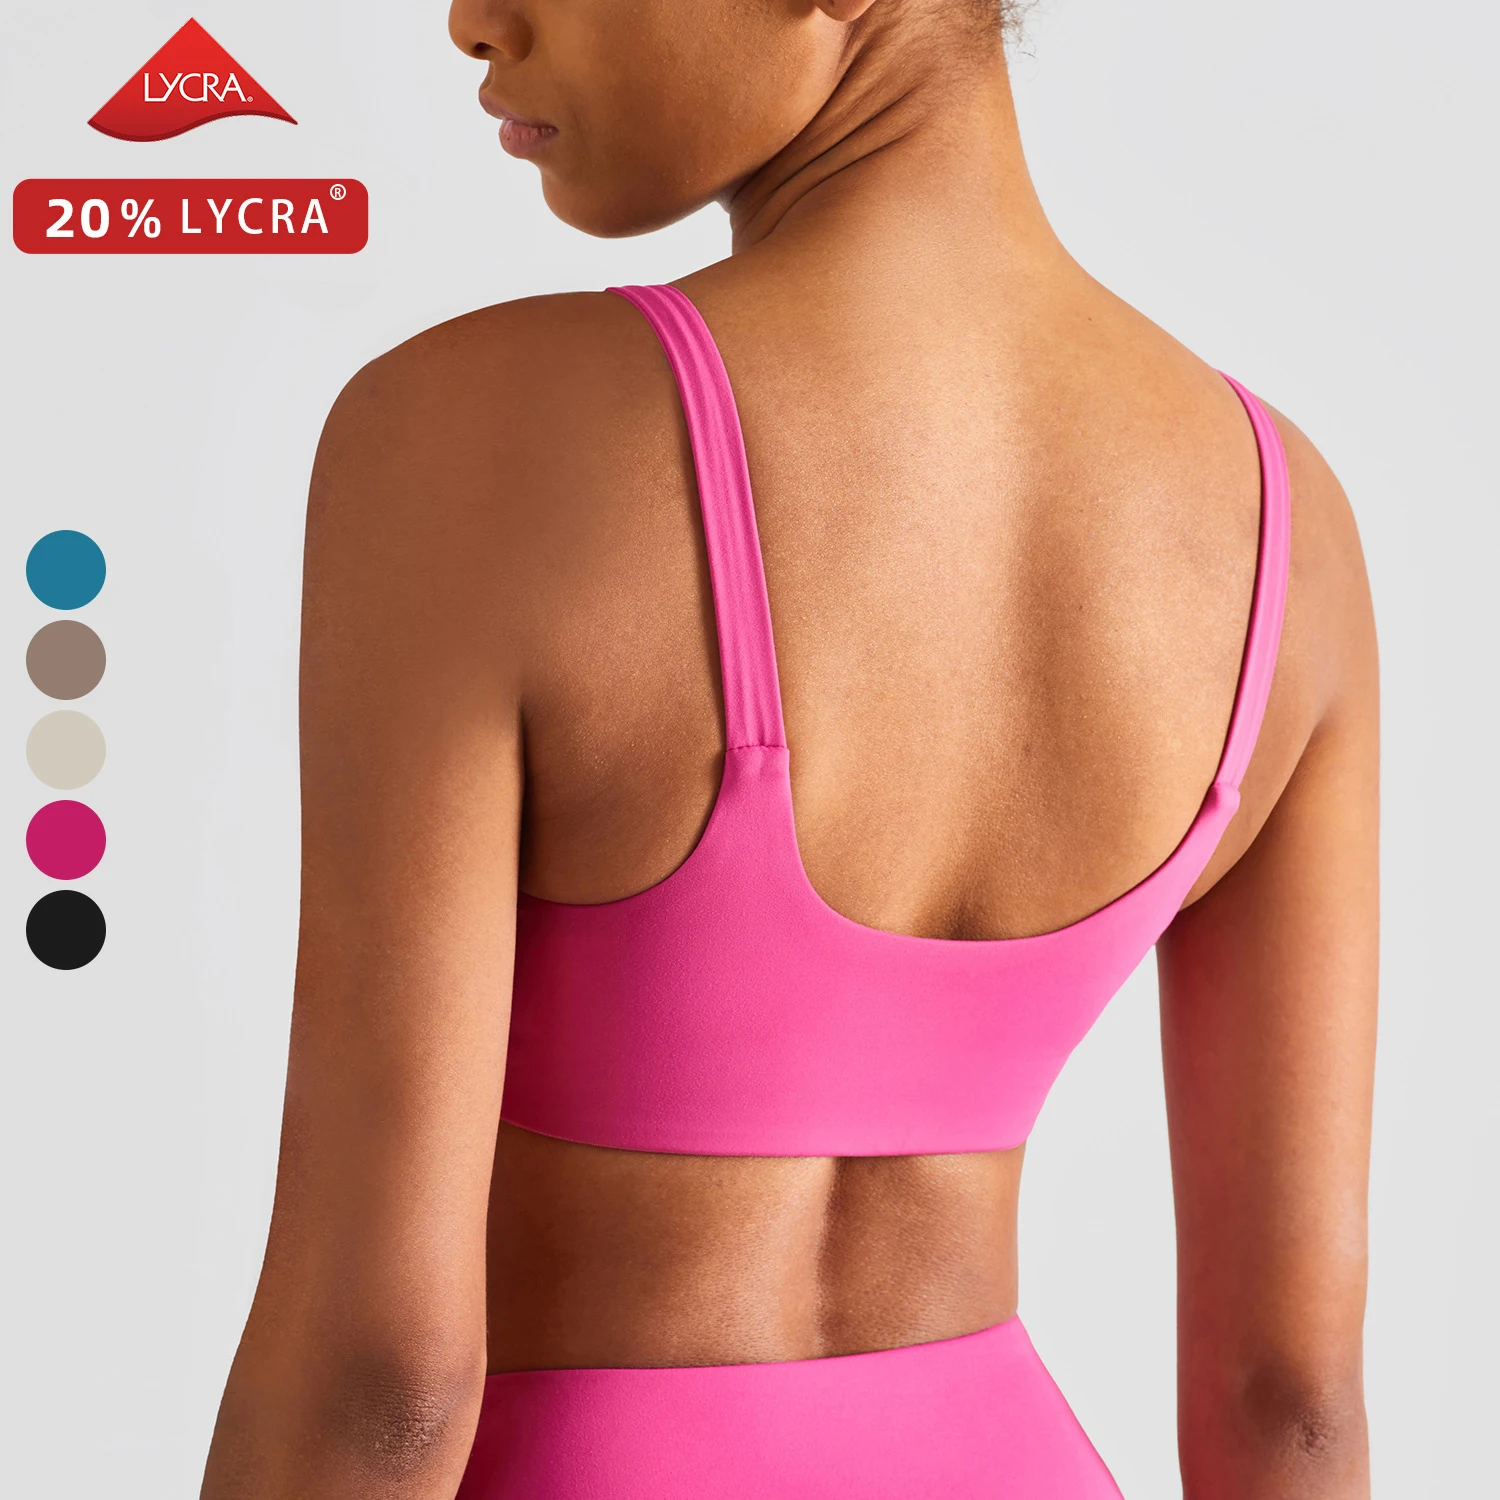  Yoga Tops With Built In Bra